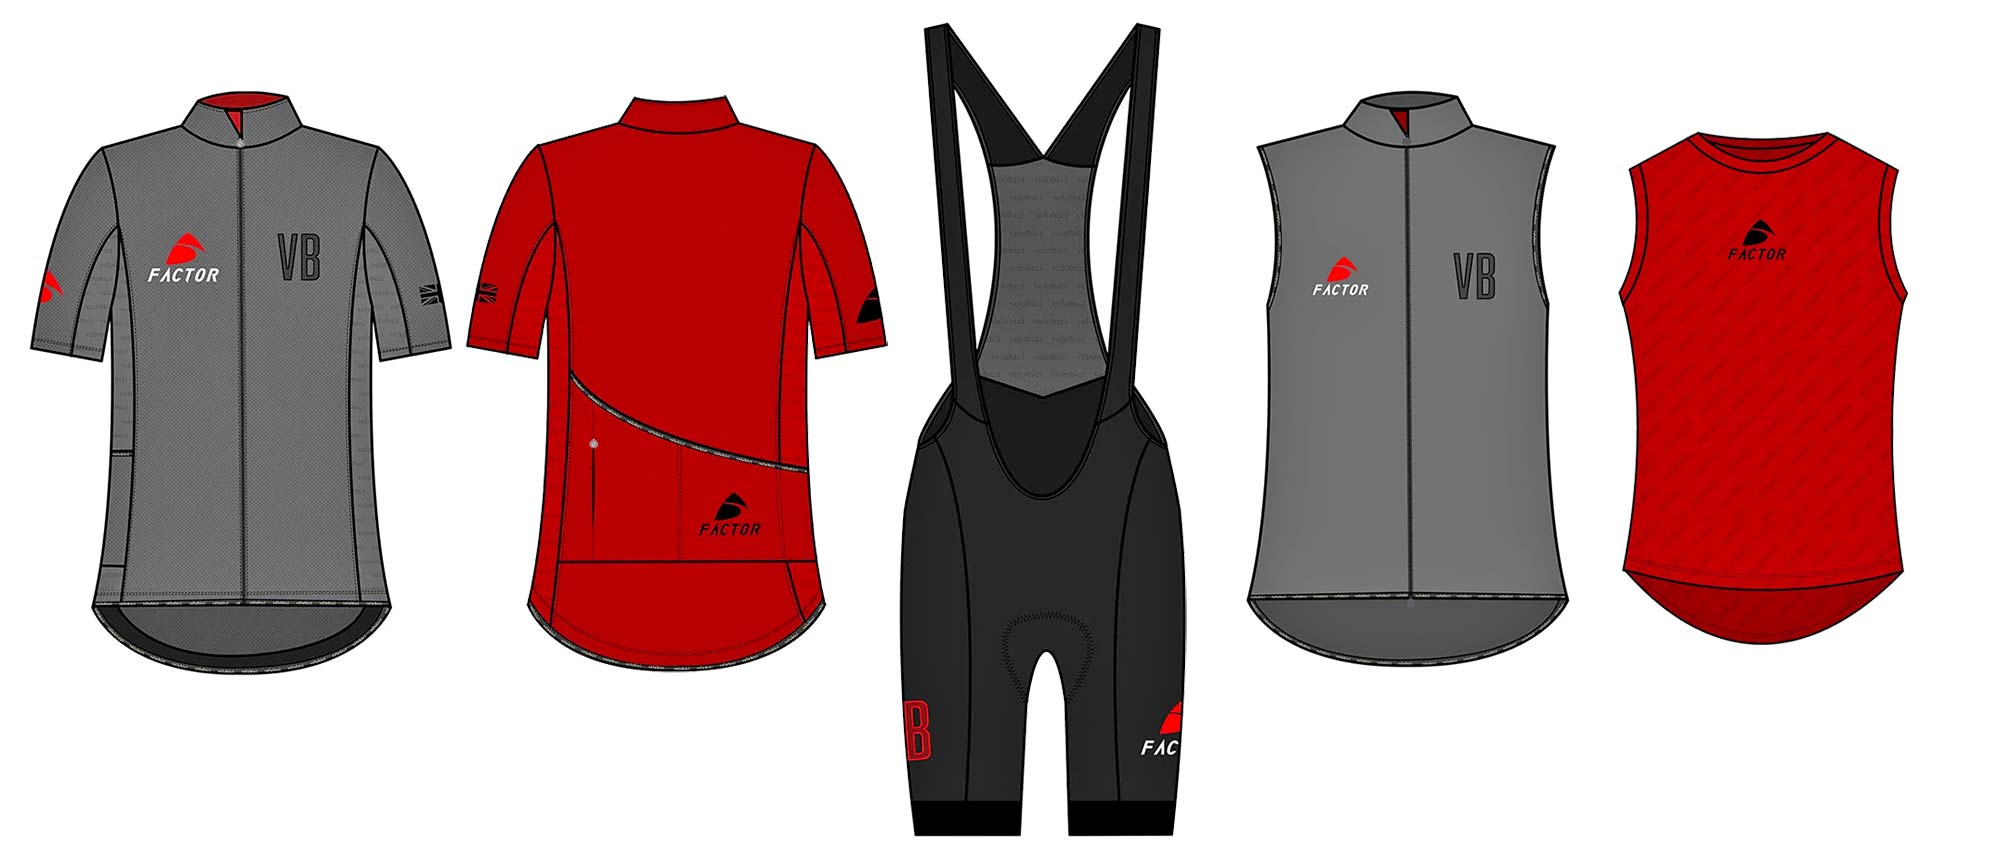 Factor x Velobici road bike riders' collection, kit options